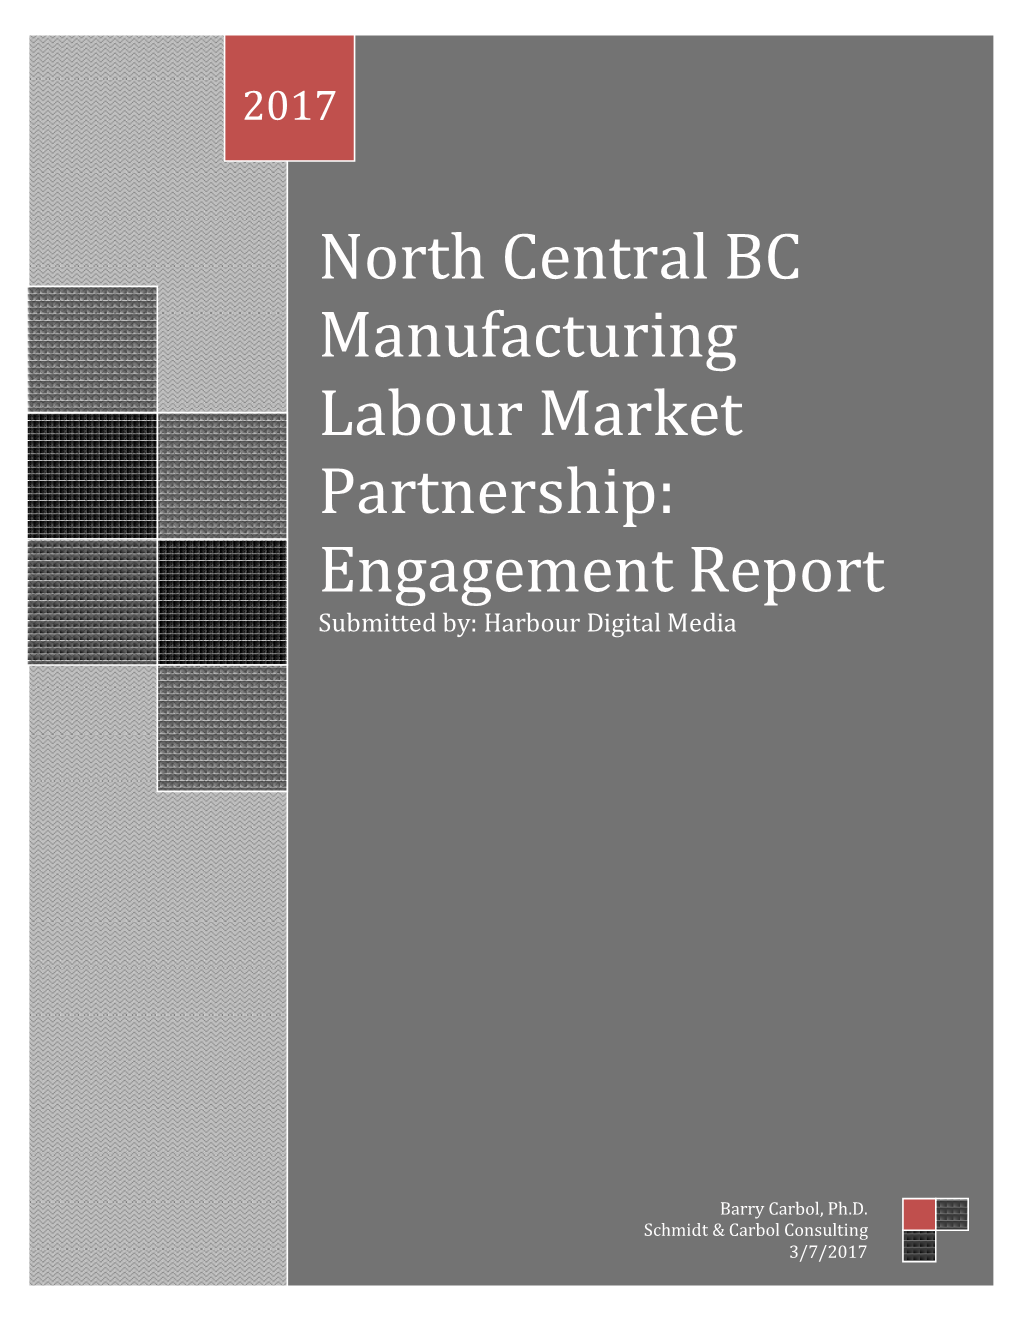 North Central BC Manufacturing Labour Market Partnership: Engagement Report Submitted By: Harbour Digital Media